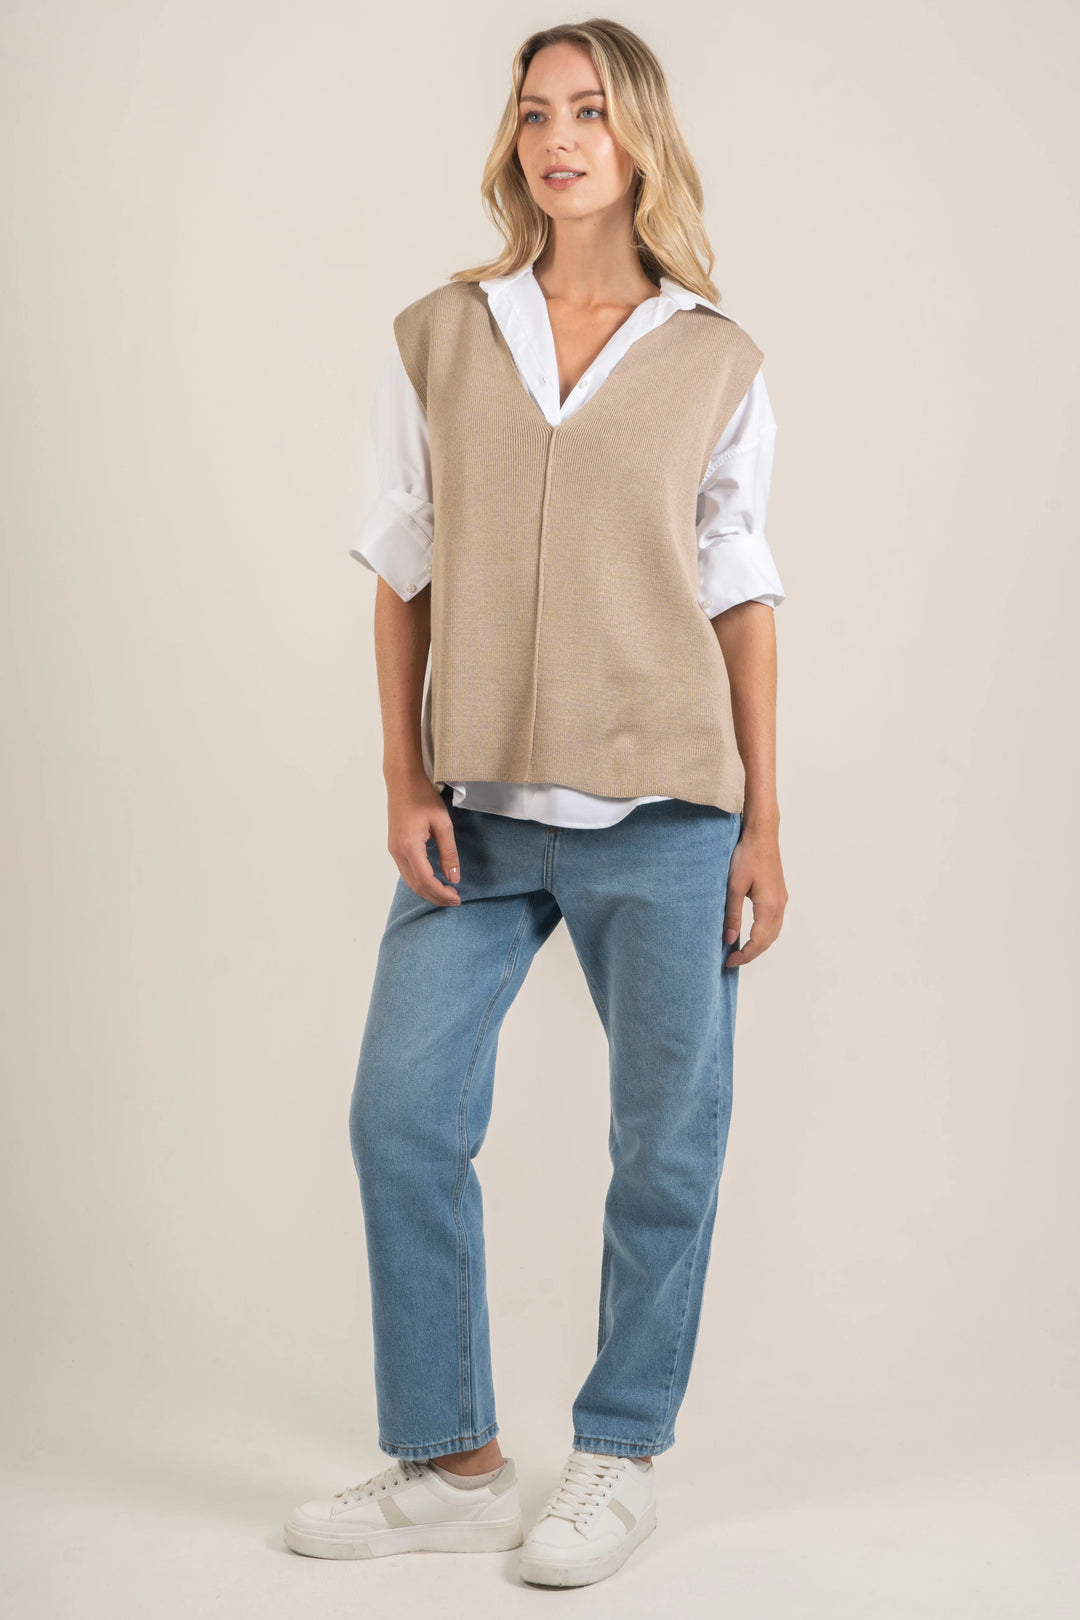 Chaleco Mujer Sweater Vest Arena